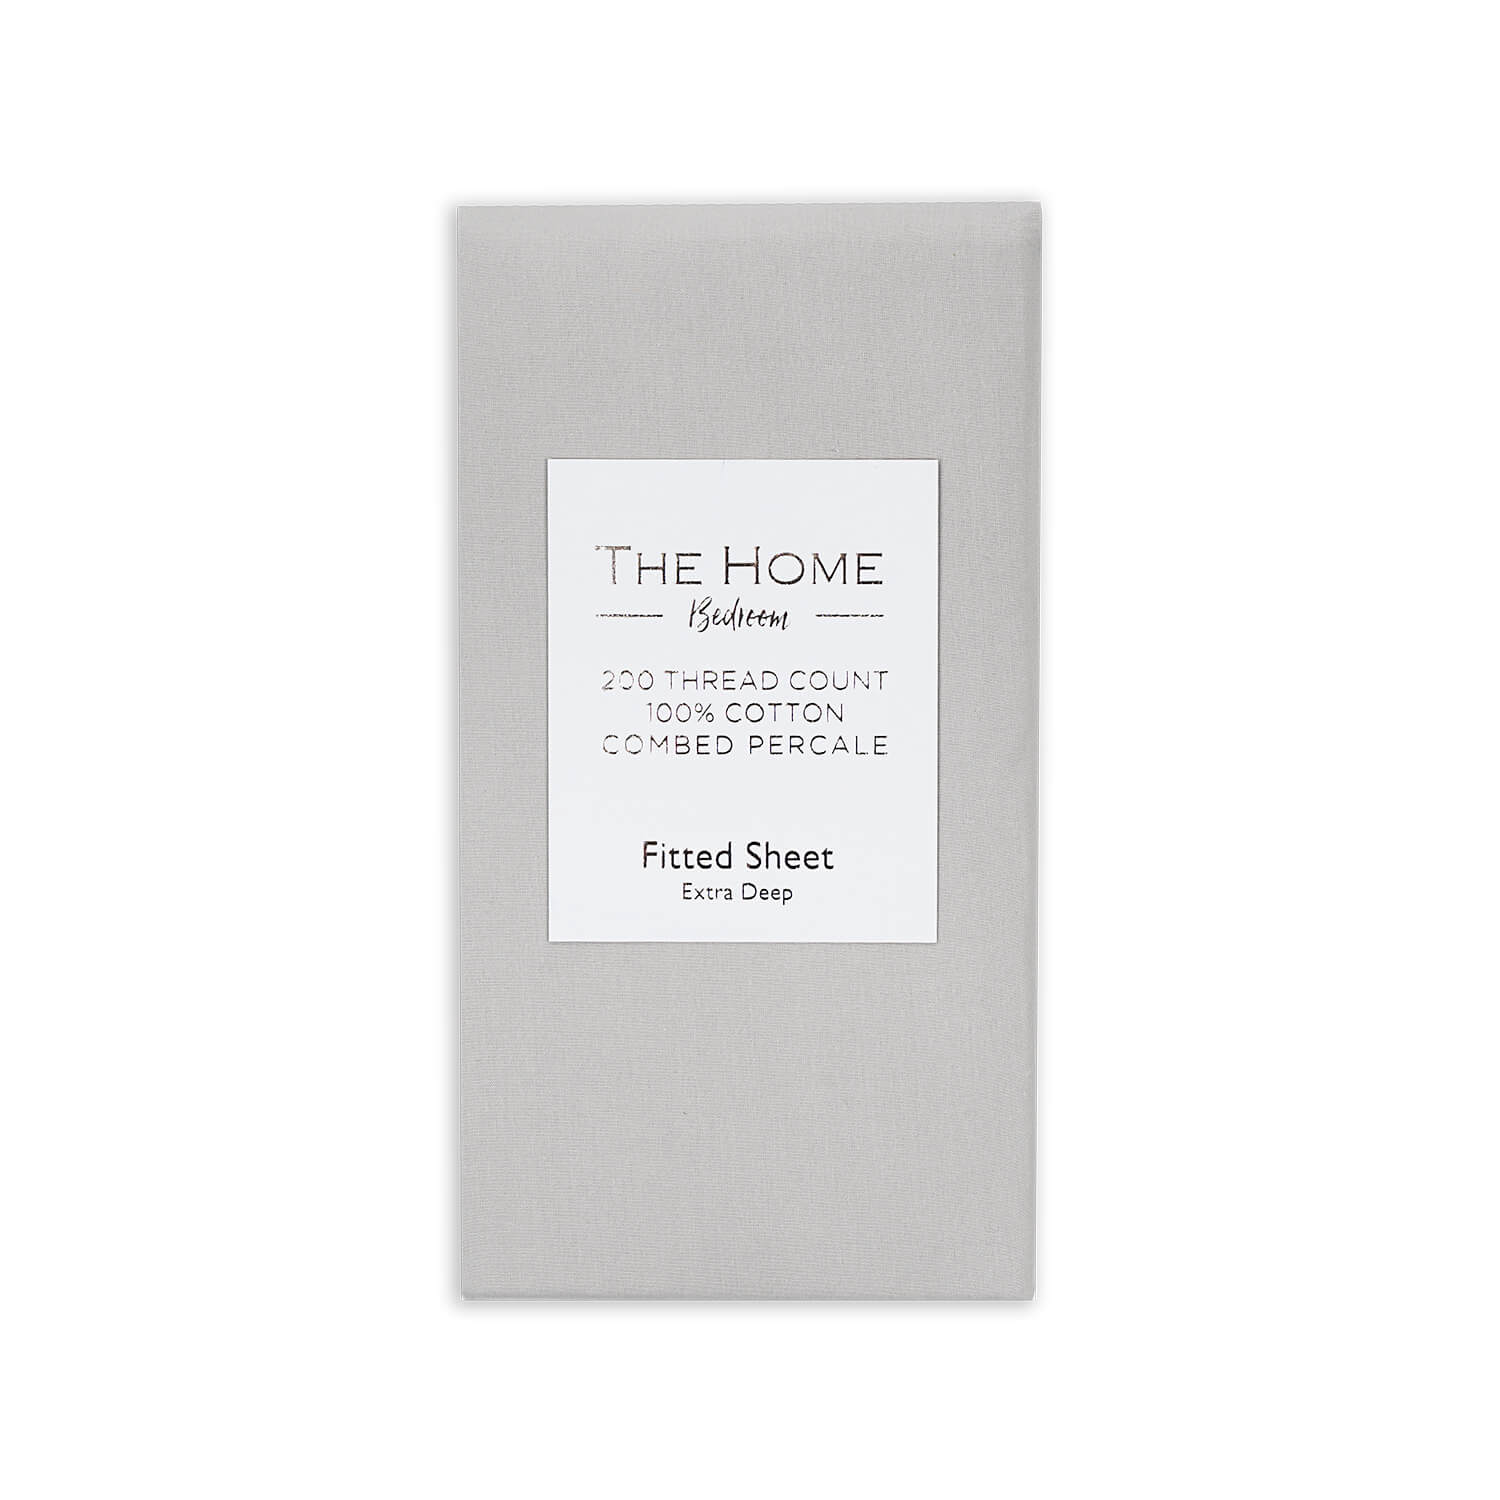 The Home Bedroom 200 Thread Count Extra Deep 100% Cotton Fitted Sheet - Grey 1 Shaws Department Stores